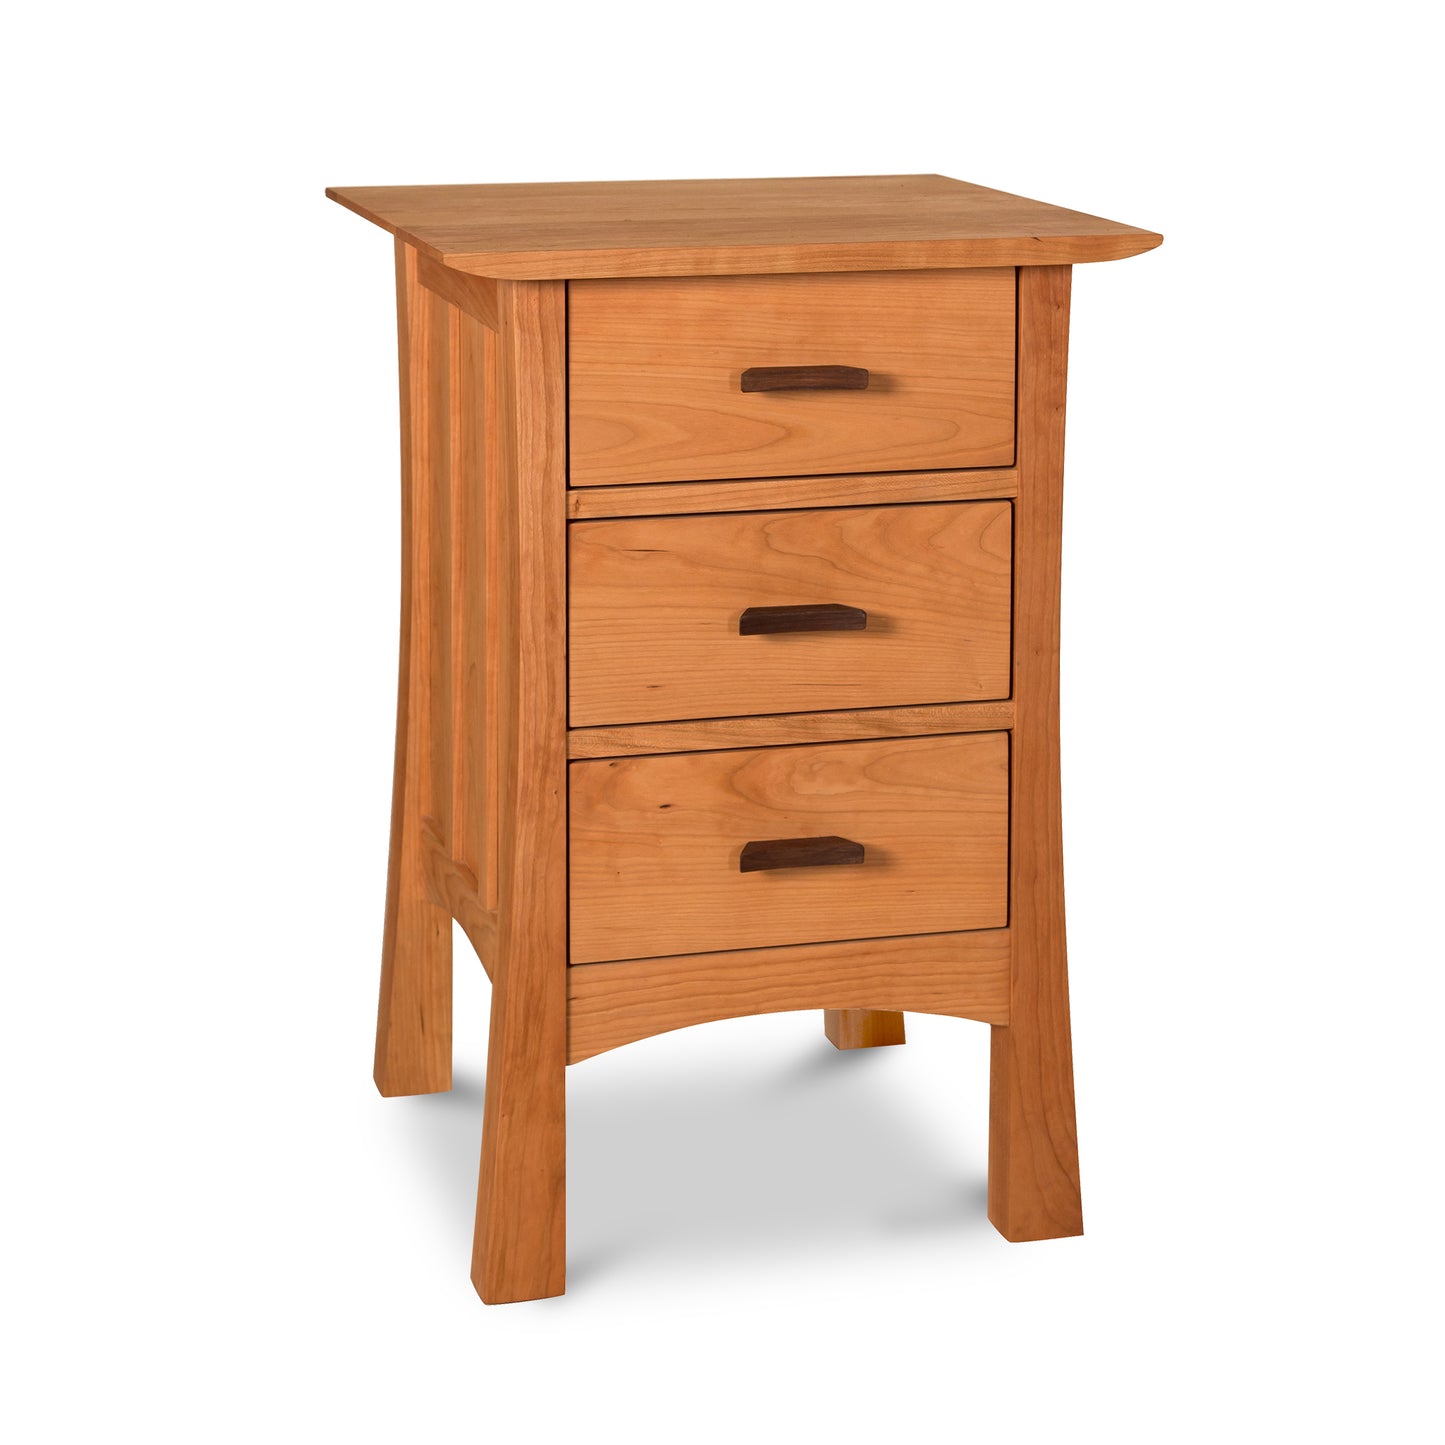 A Contemporary Craftsman 3-Drawer Nightstand with three drawers for storage by Vermont Furniture Designs.